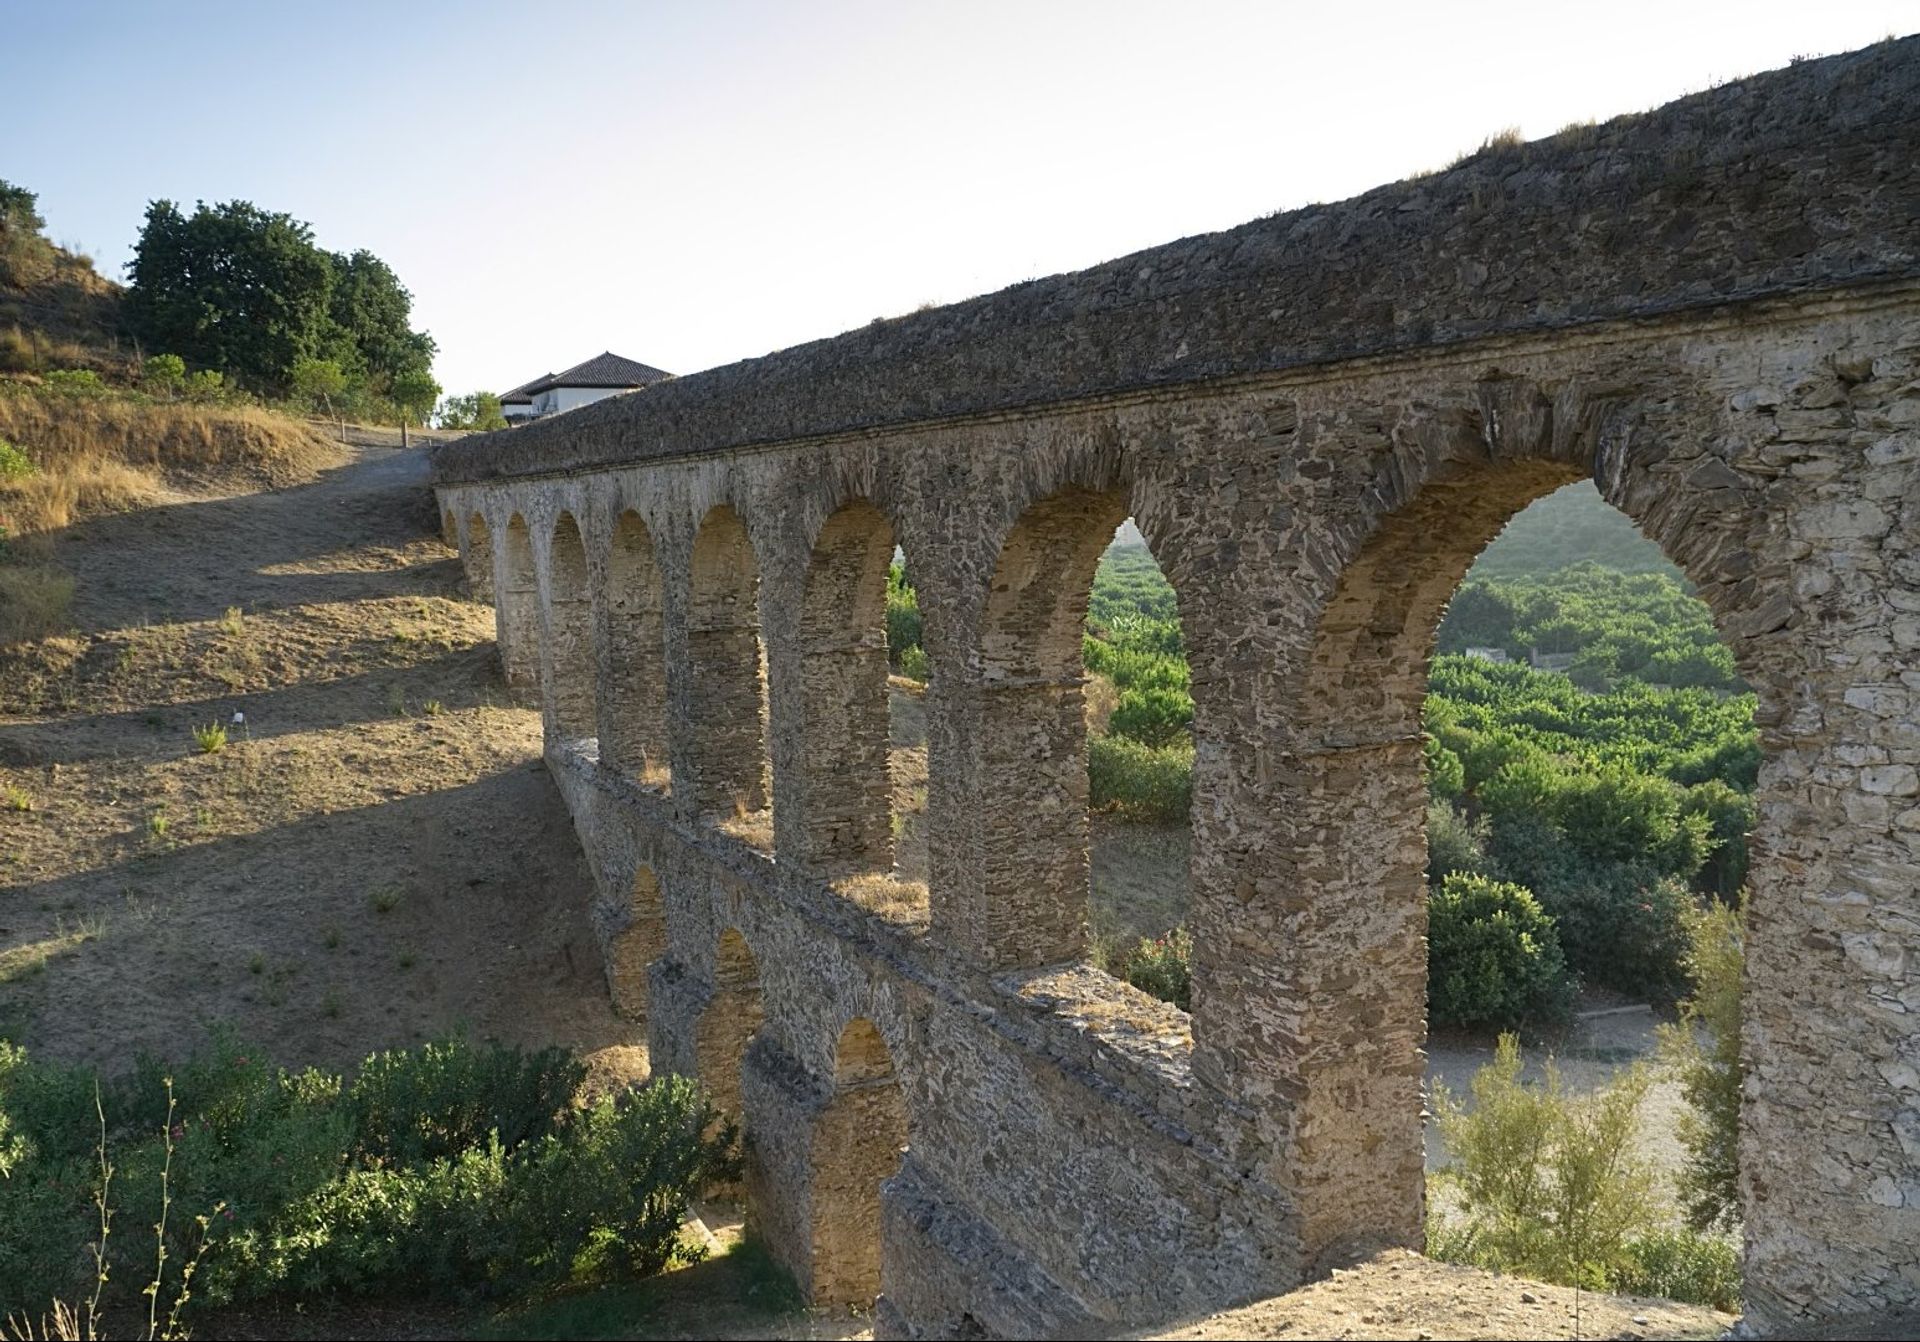 The Roman aquaduct stretches from the river Verde to river Seco in Almunecar